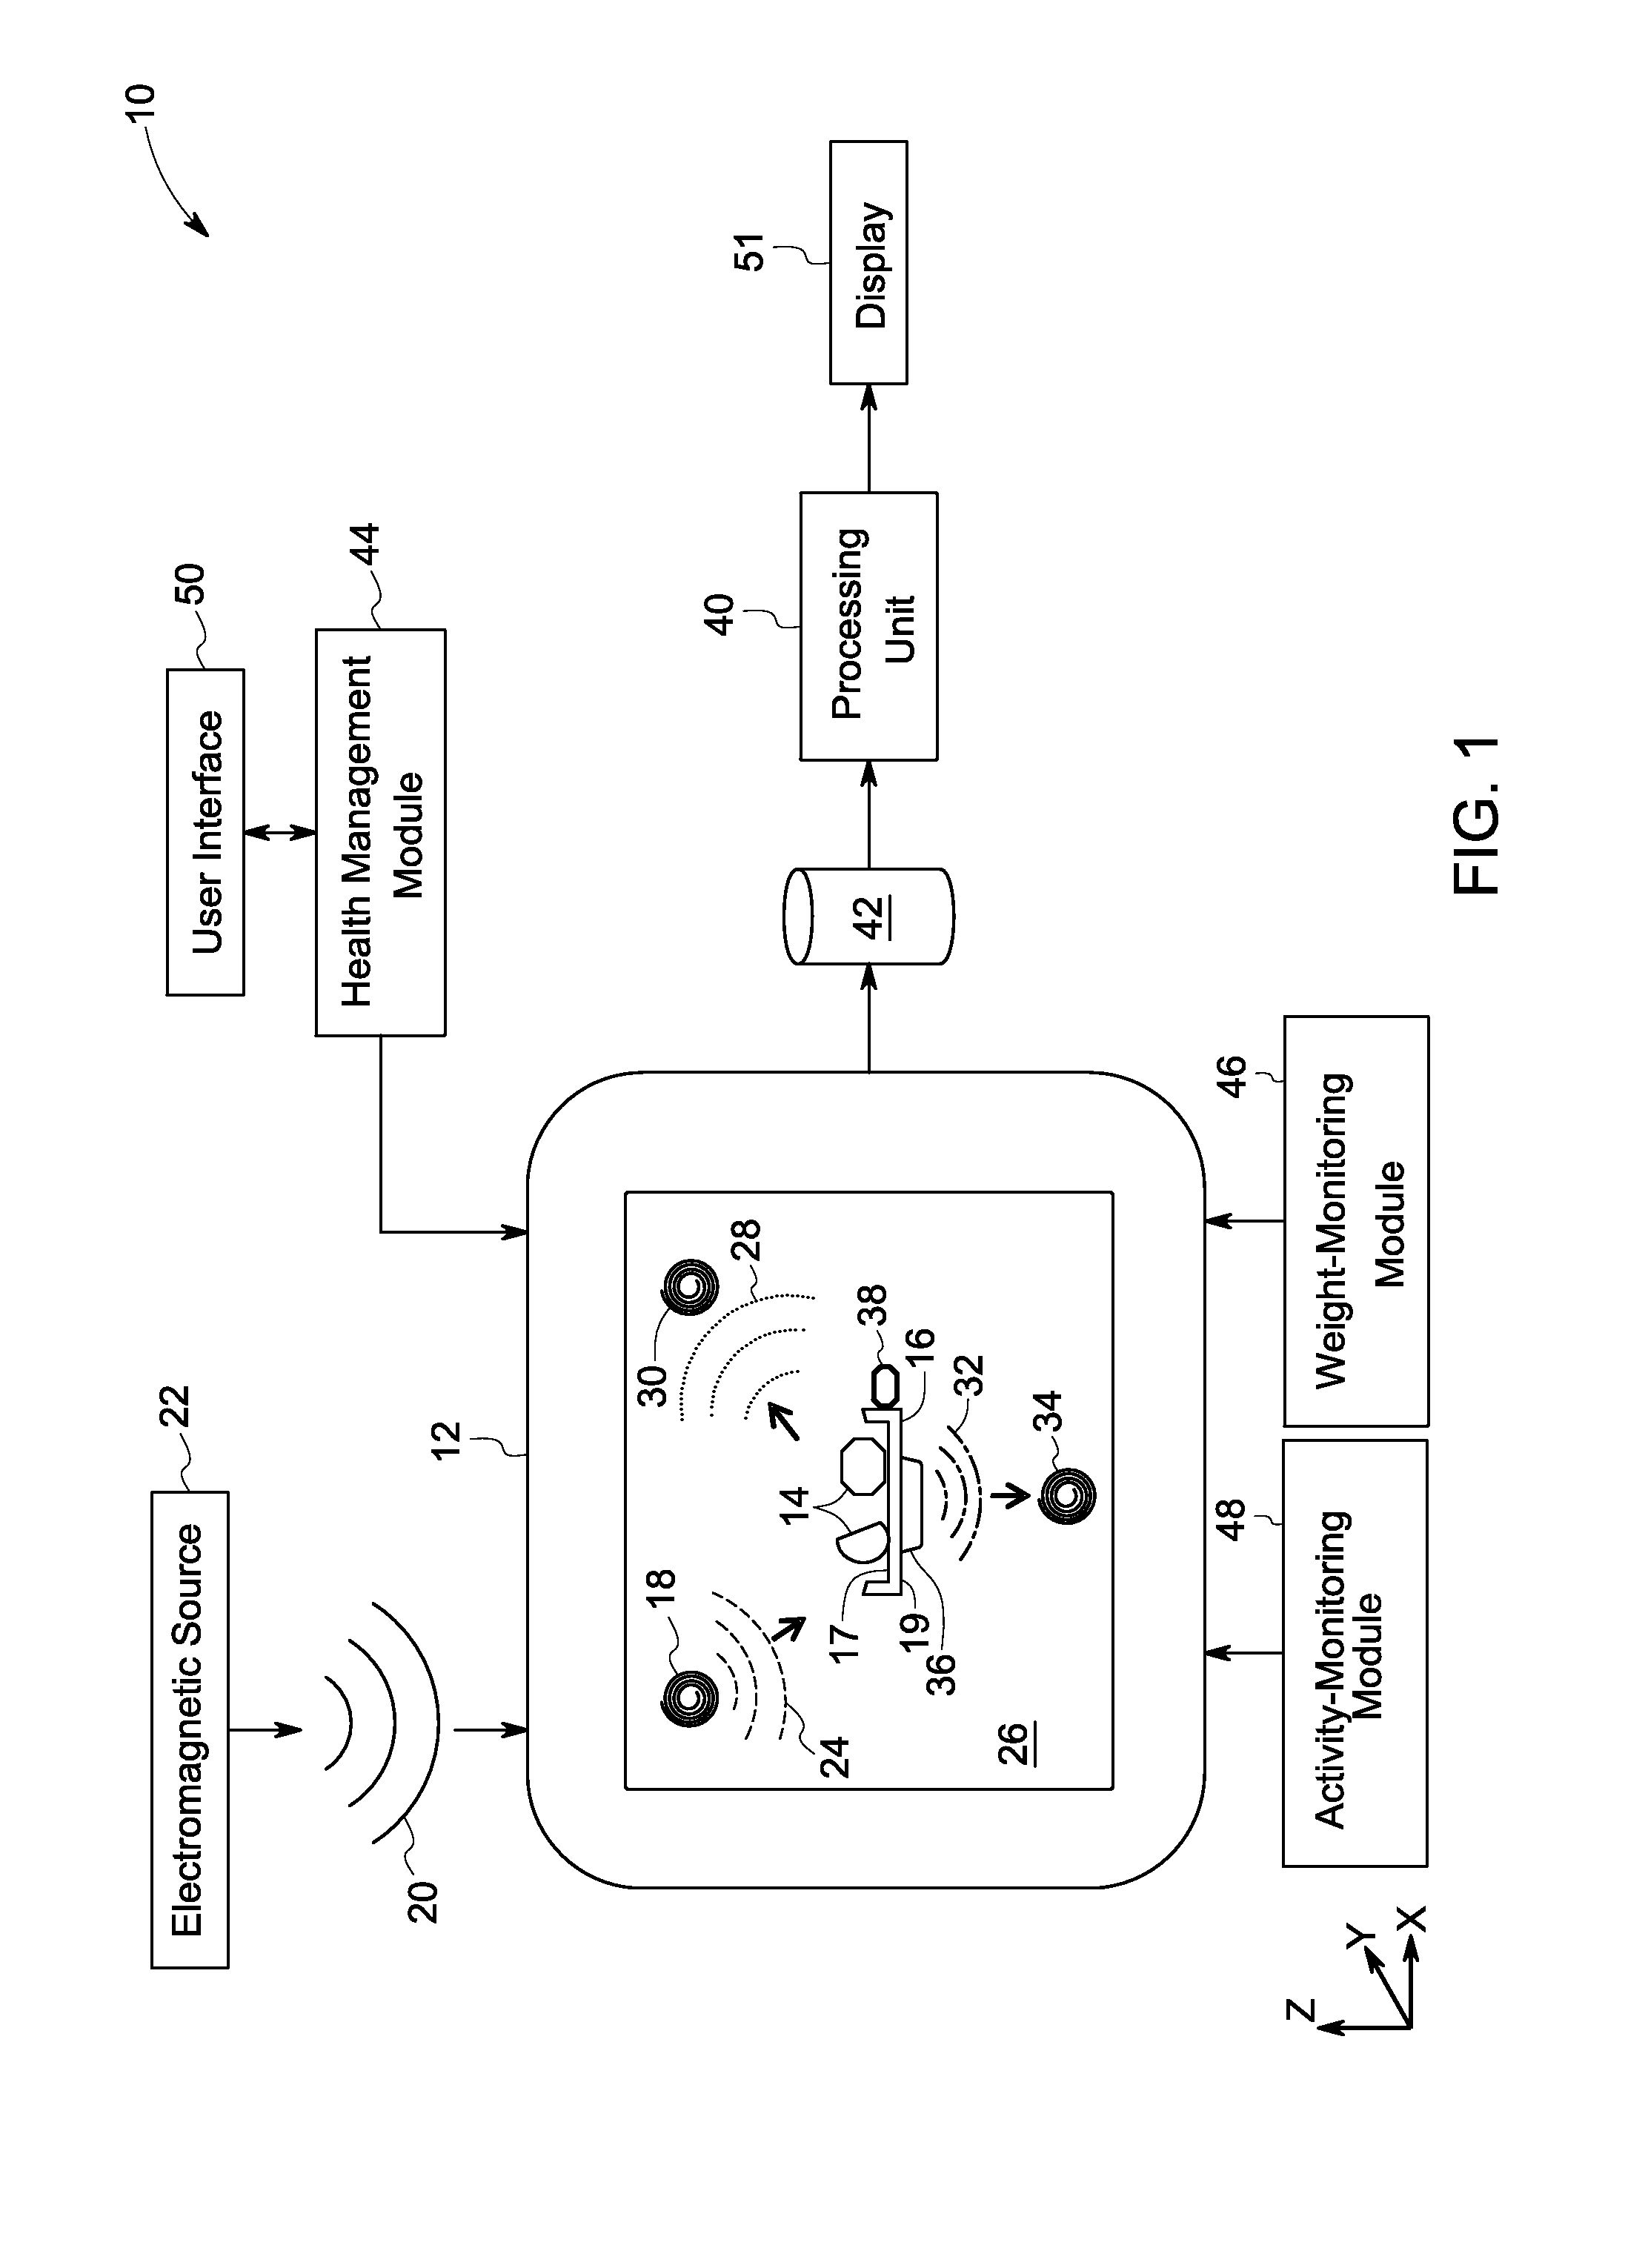 Systems and methods for non-destructively measuring calorie contents of food items